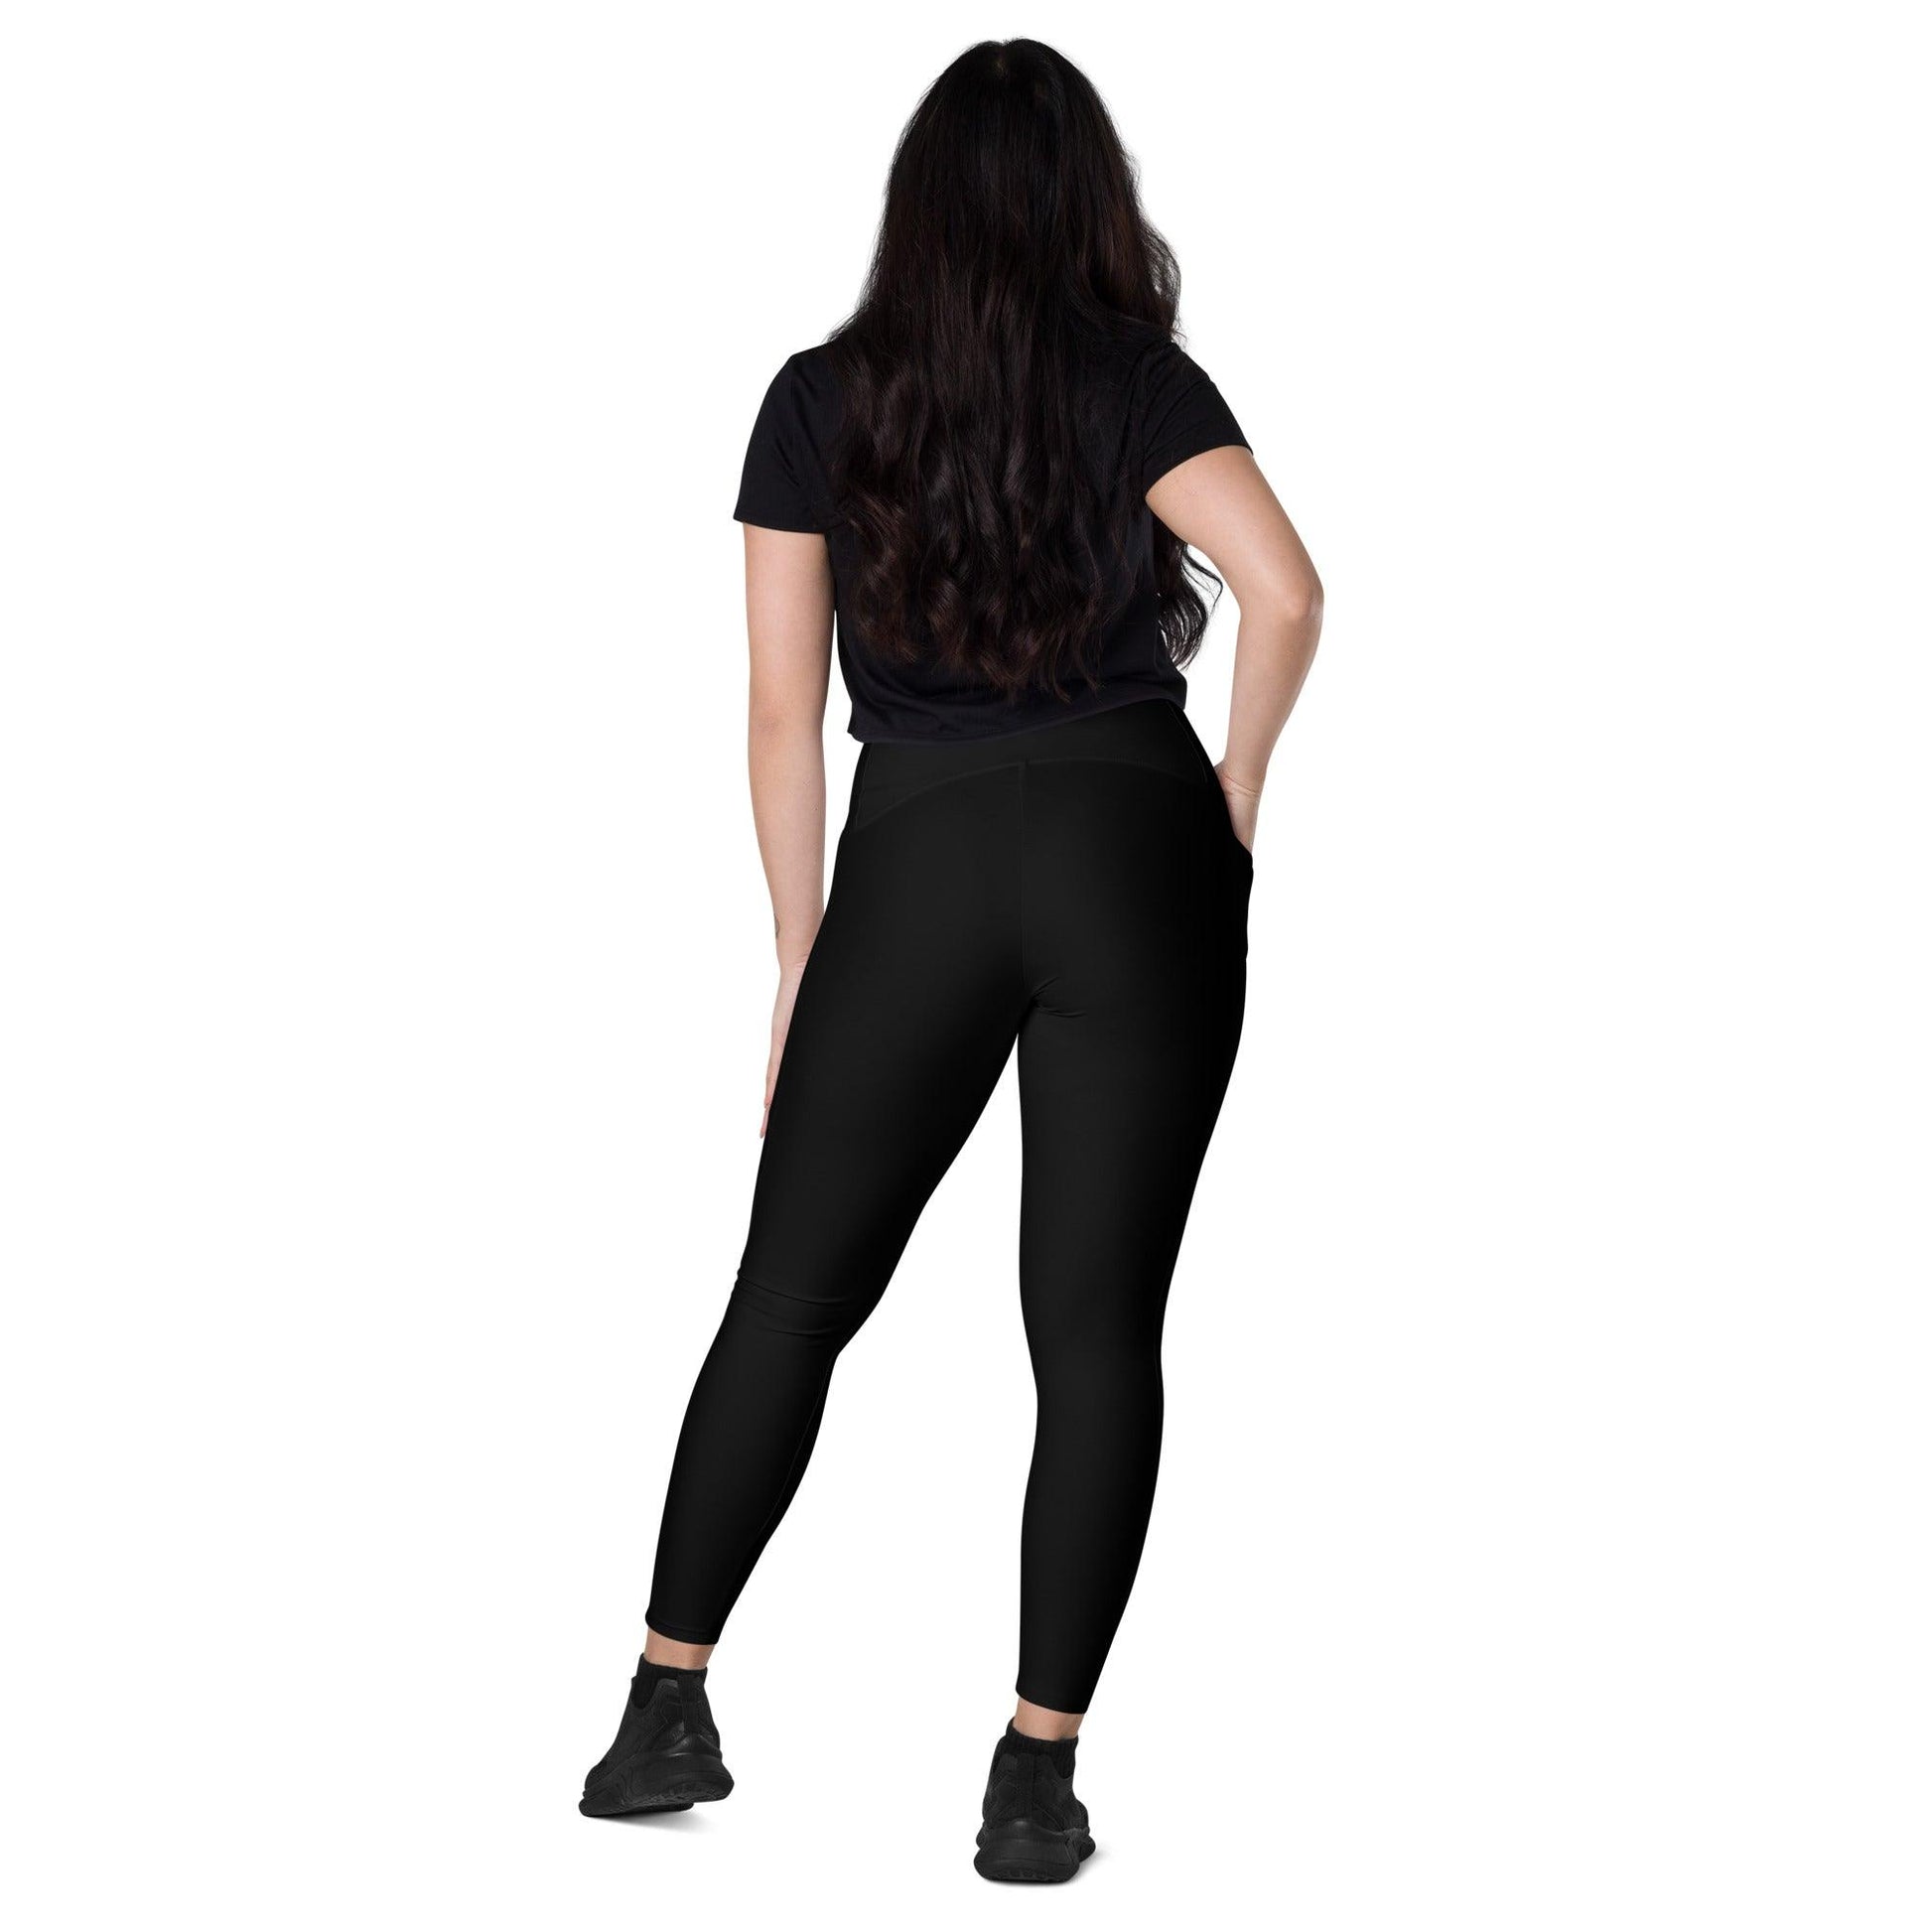 iSAW Womens Black Leggings with Pockets - iSAW Company